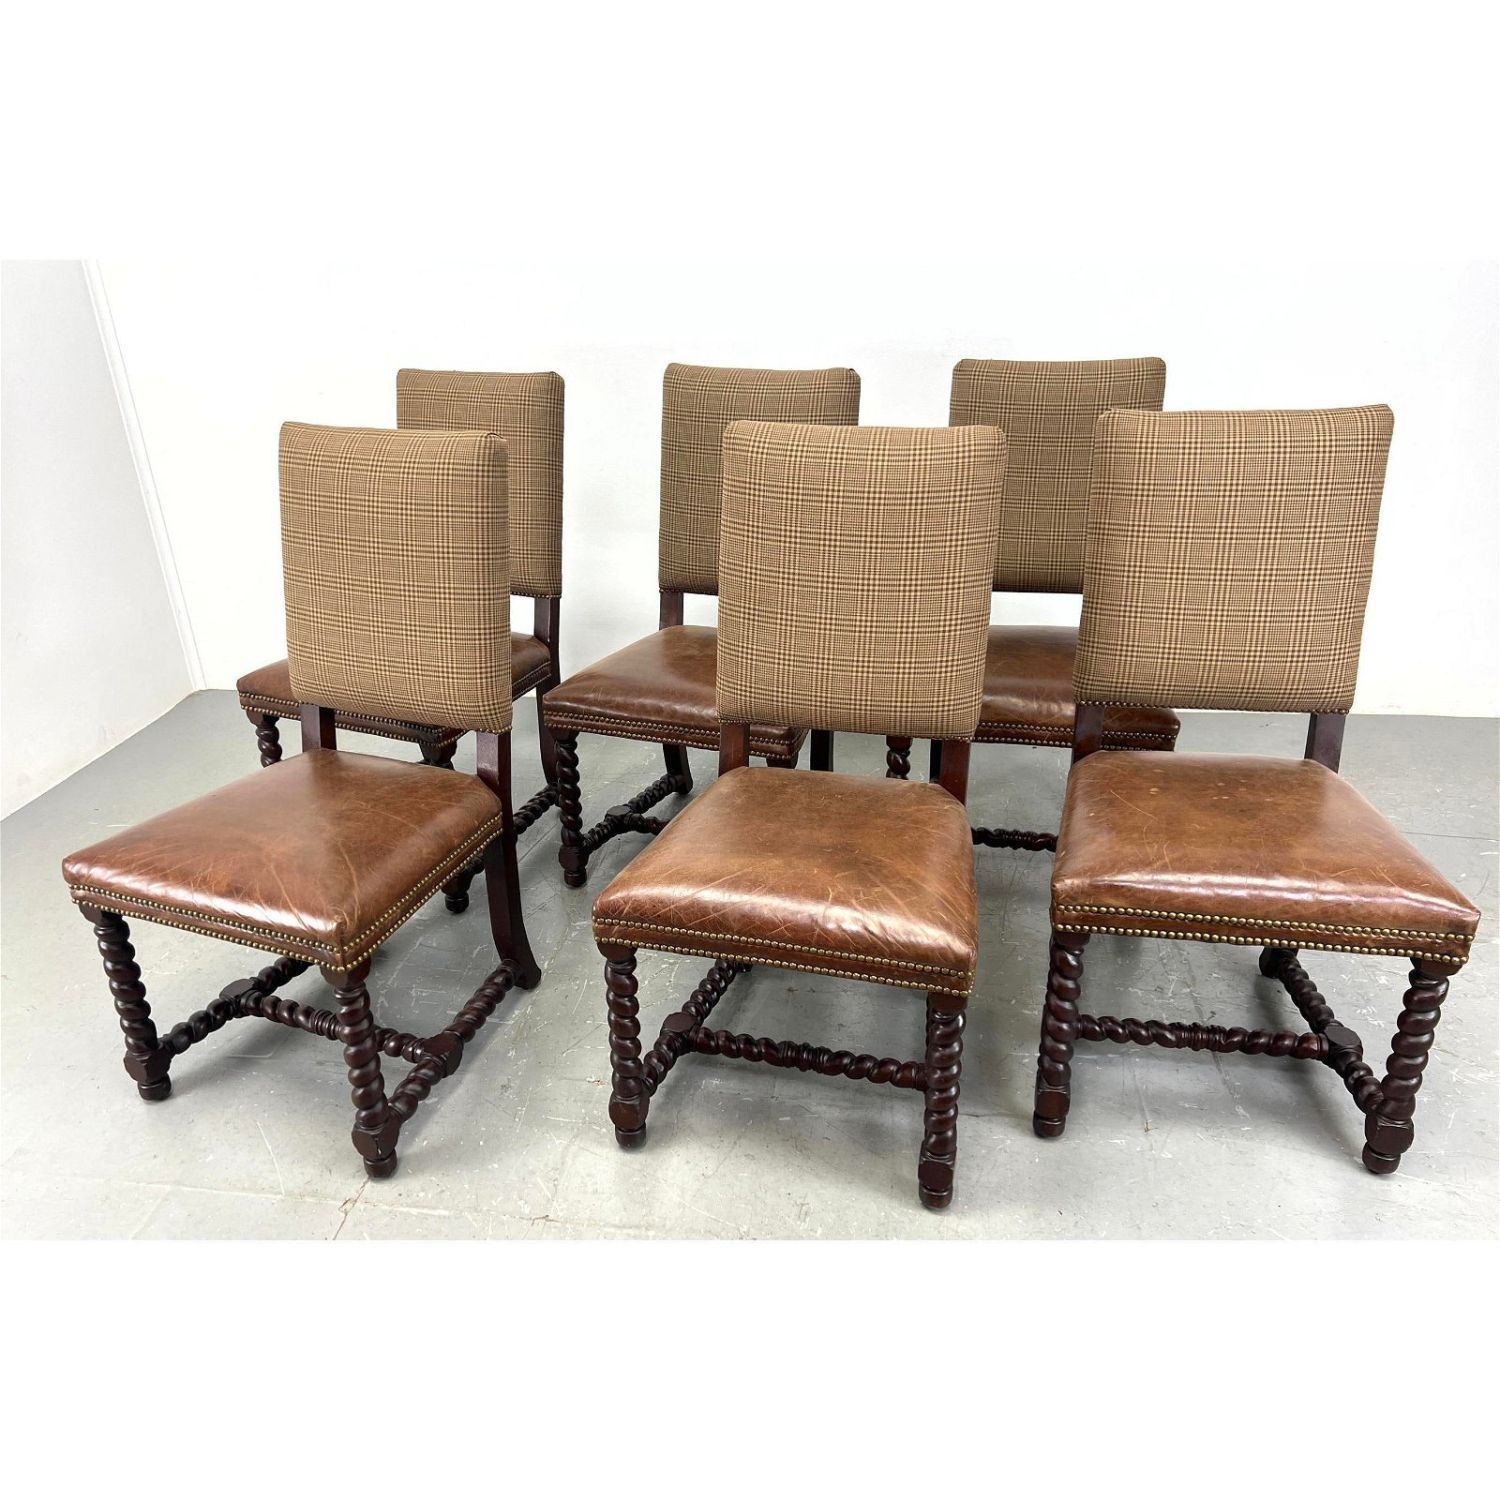 6 Ralph Lauren side chairs with